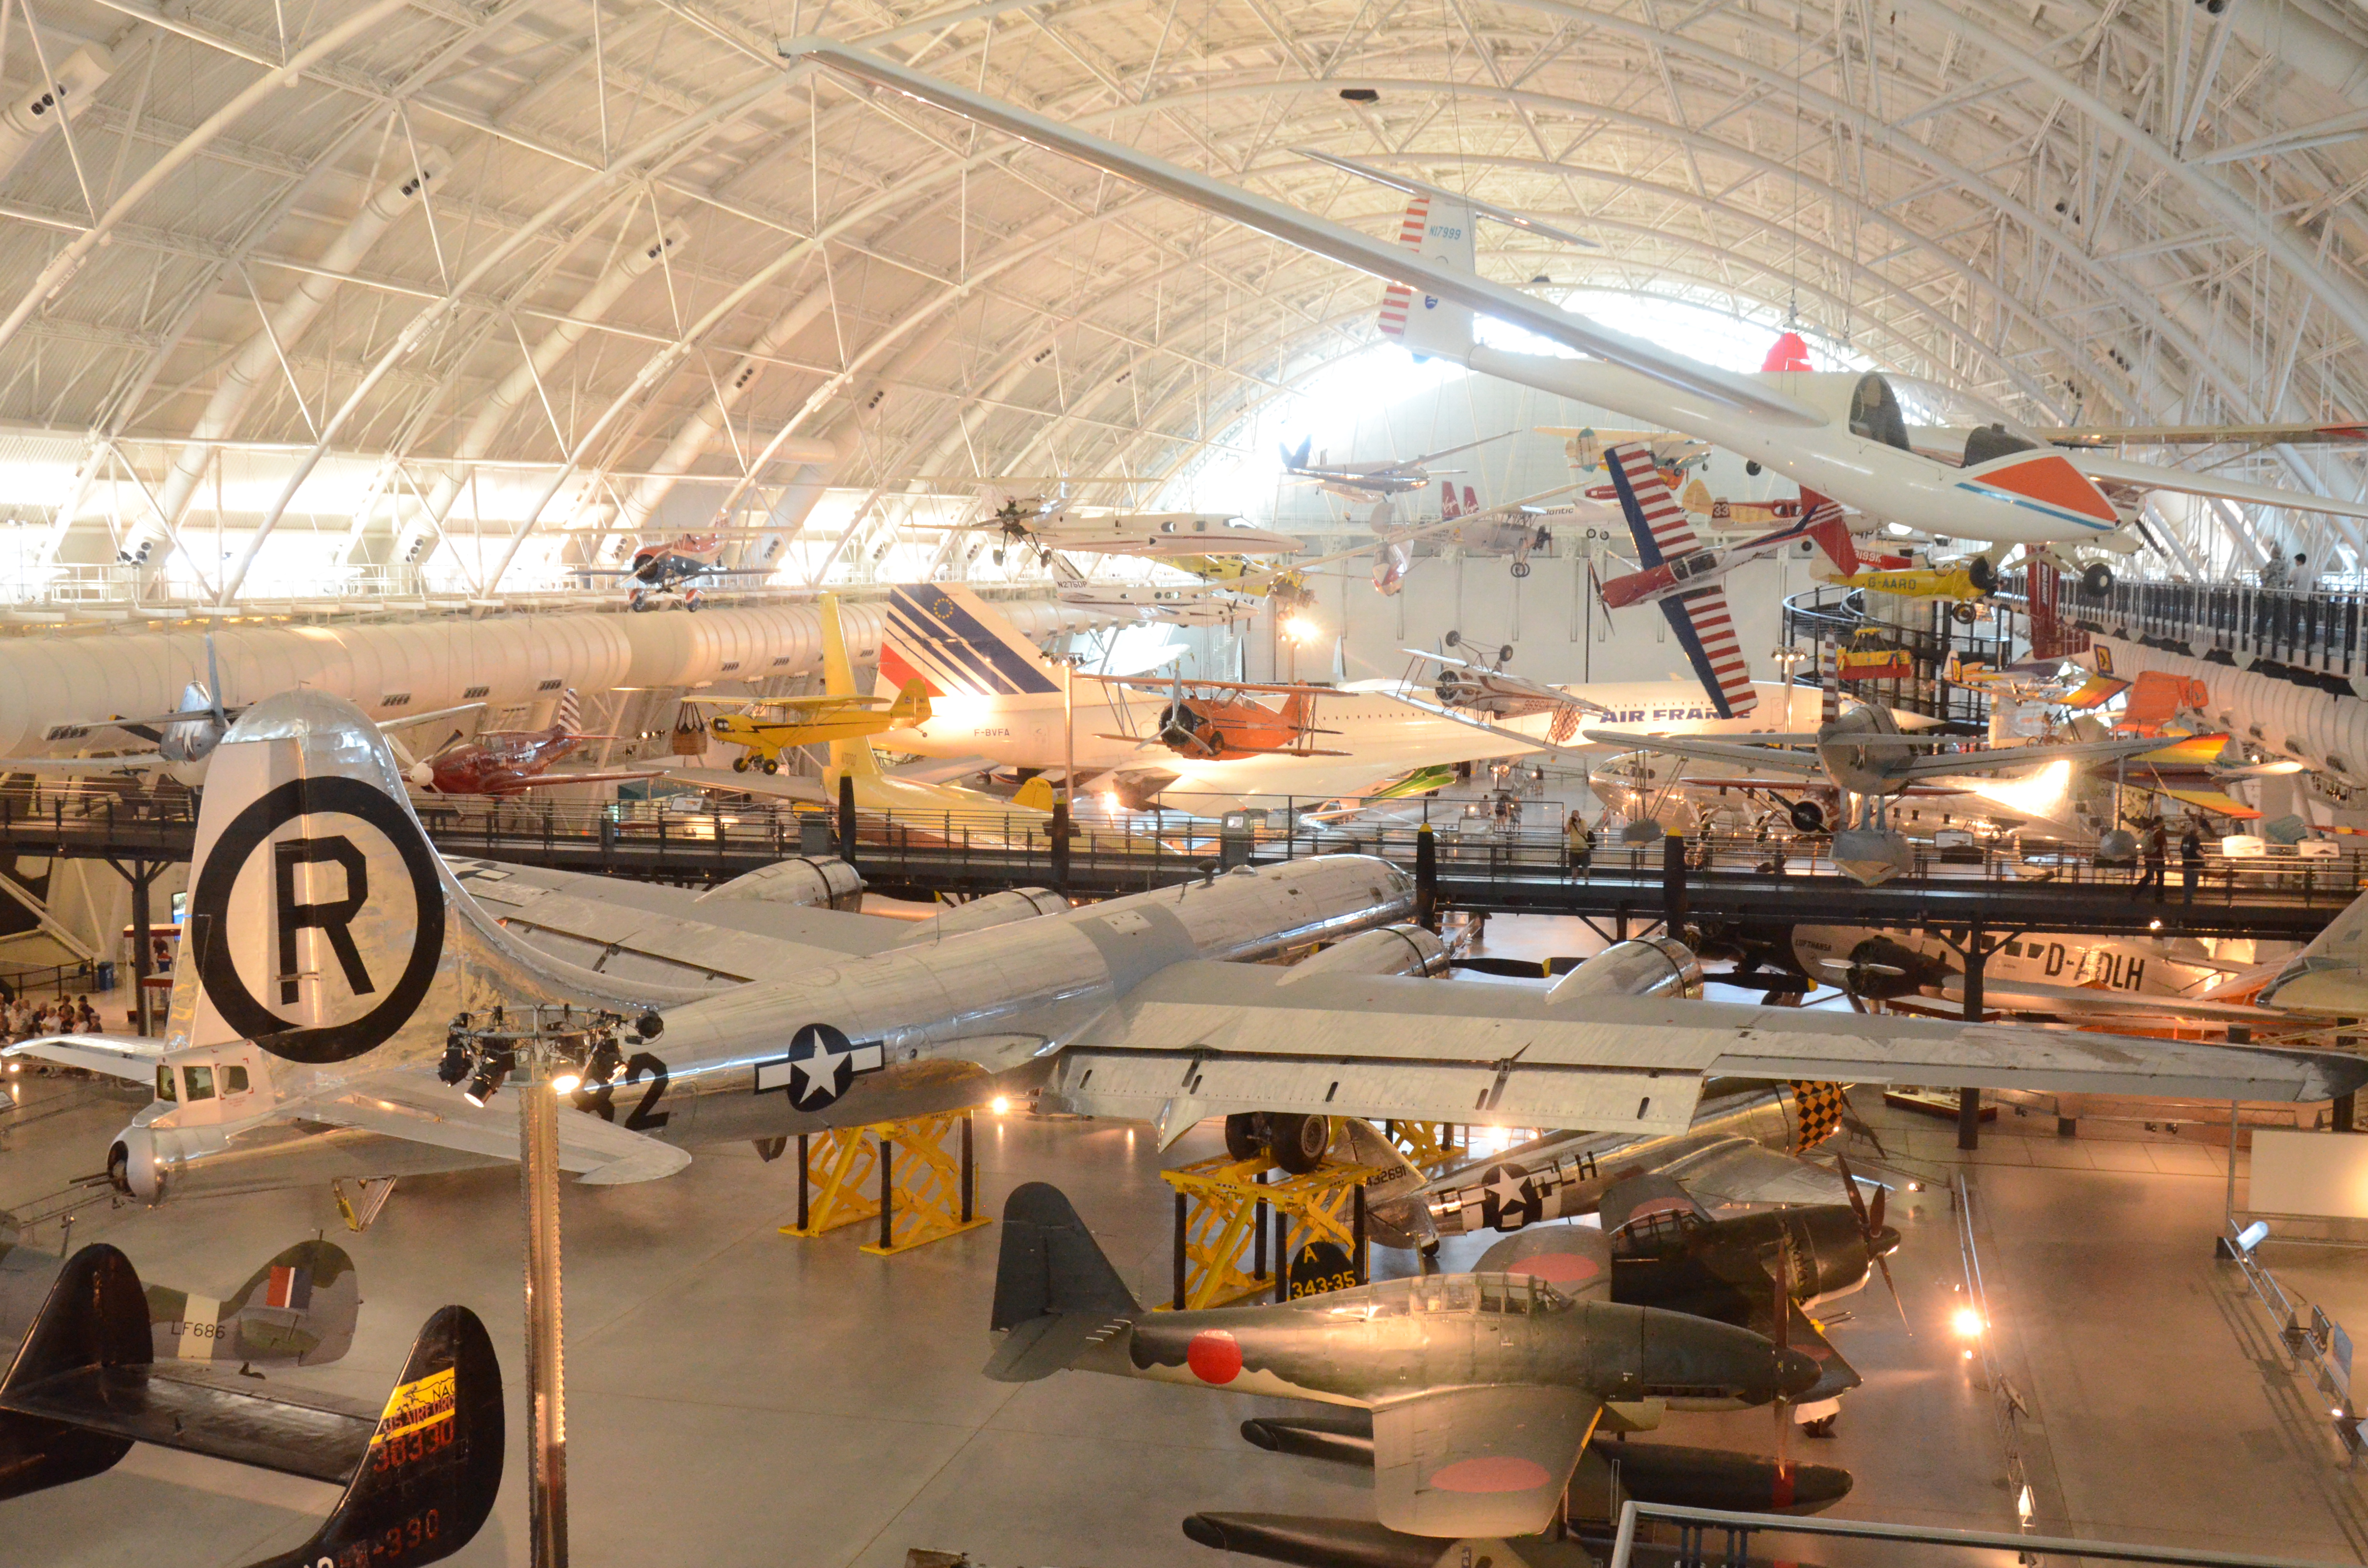 Steven F. Udvar-Hazy Center: View of south hangar, including B-29 Superfortress "Enola Gay", a glimpse of the Air France Concorde, and many others